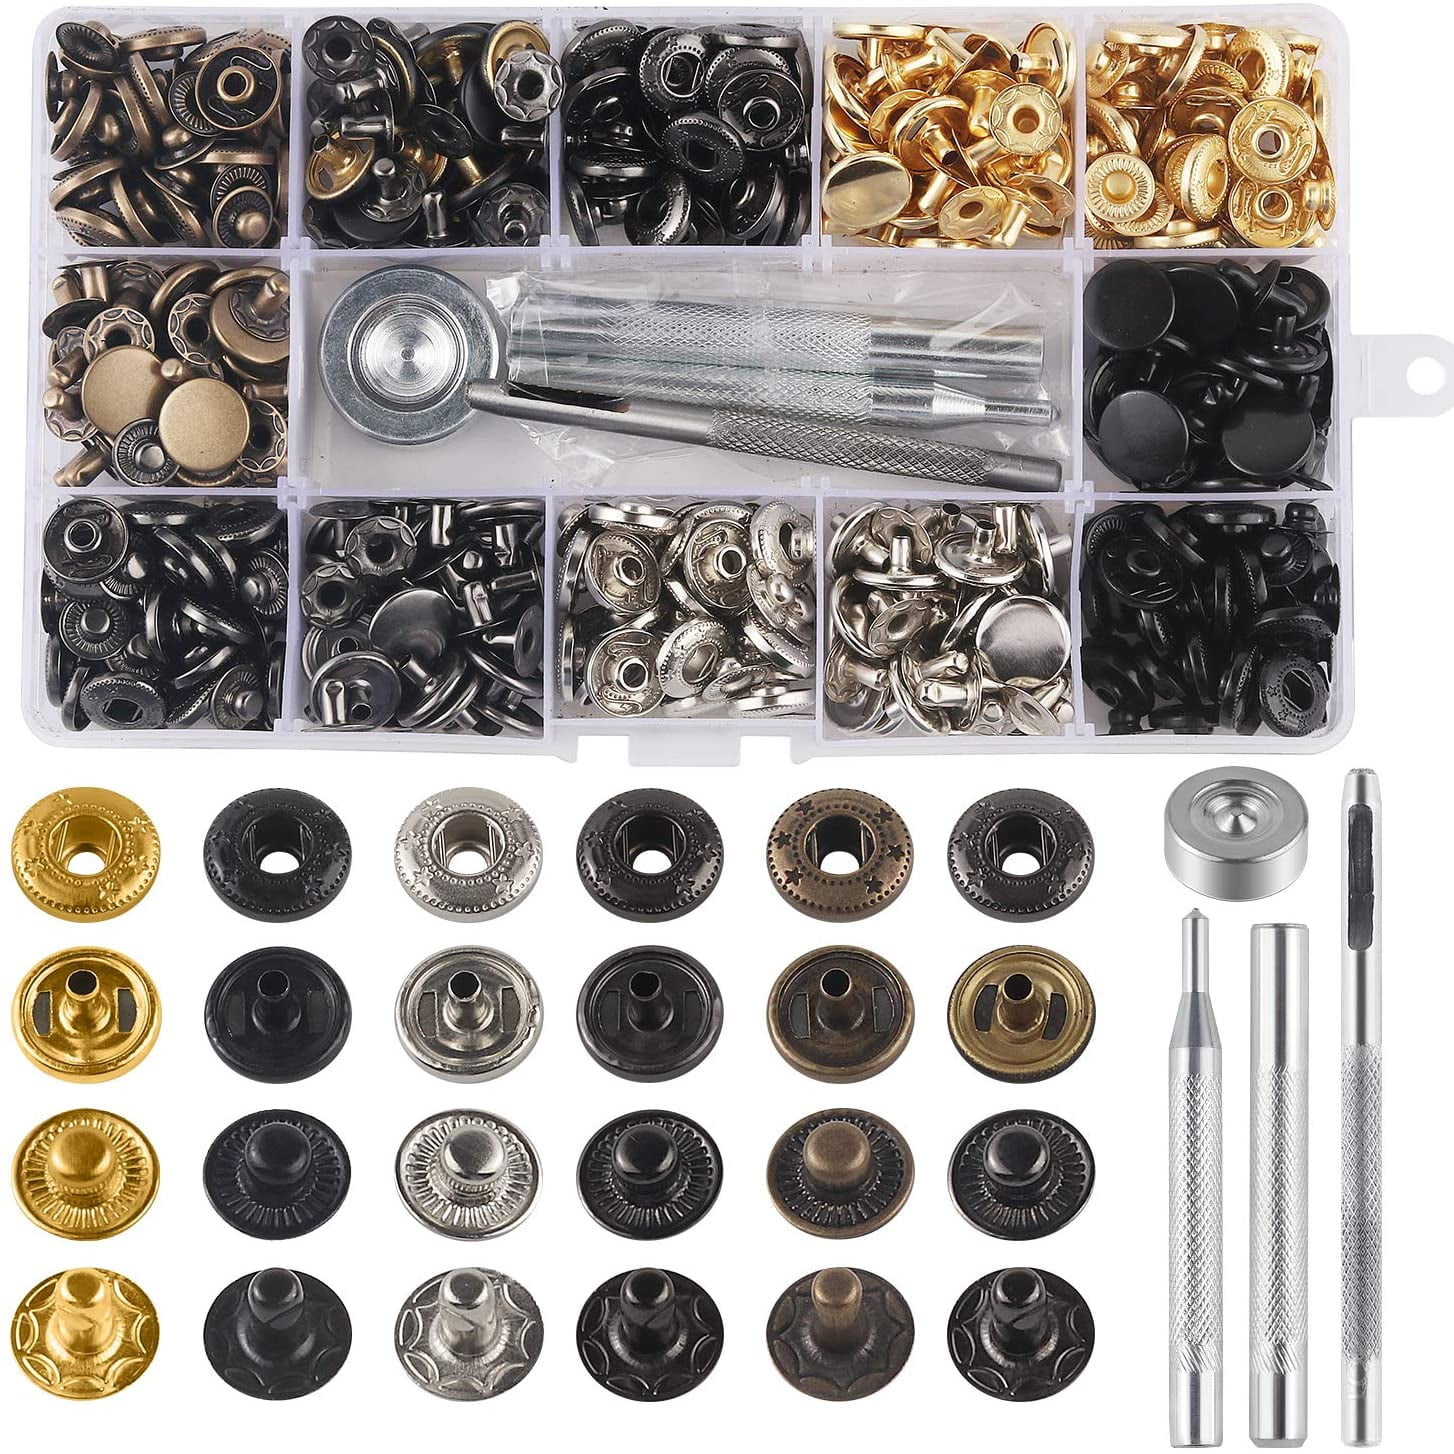 12.5 mm in Diameter Hotop 100 Set Snap Fasteners Leather Snaps Button Kit Press Studs with 4 Pieces Fixing Tools 